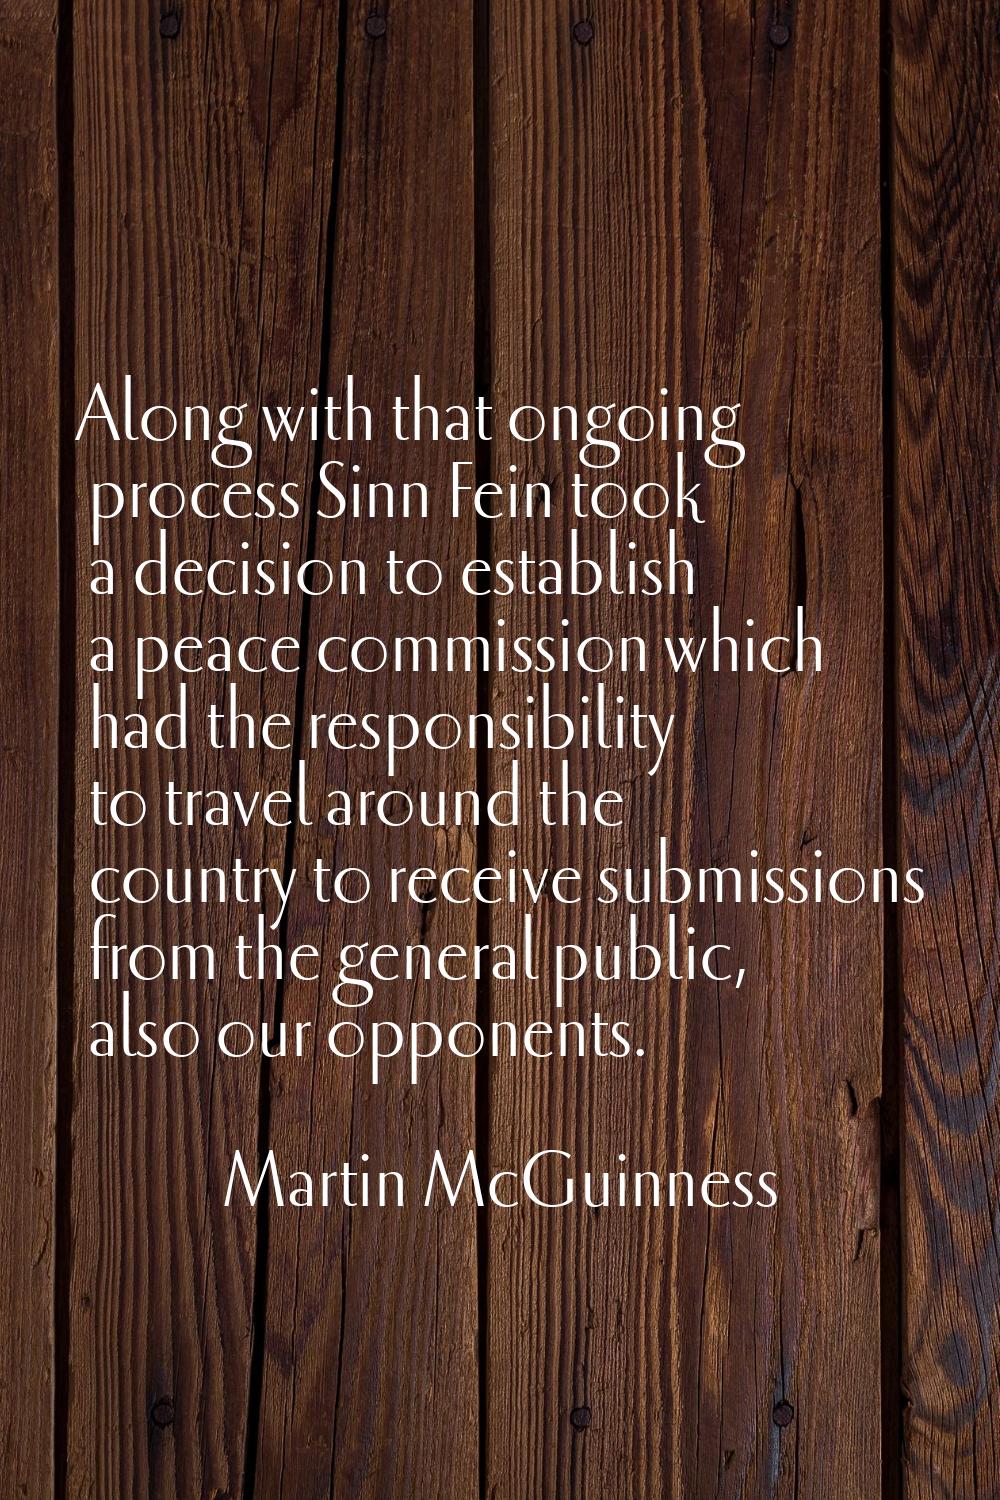 Along with that ongoing process Sinn Fein took a decision to establish a peace commission which had